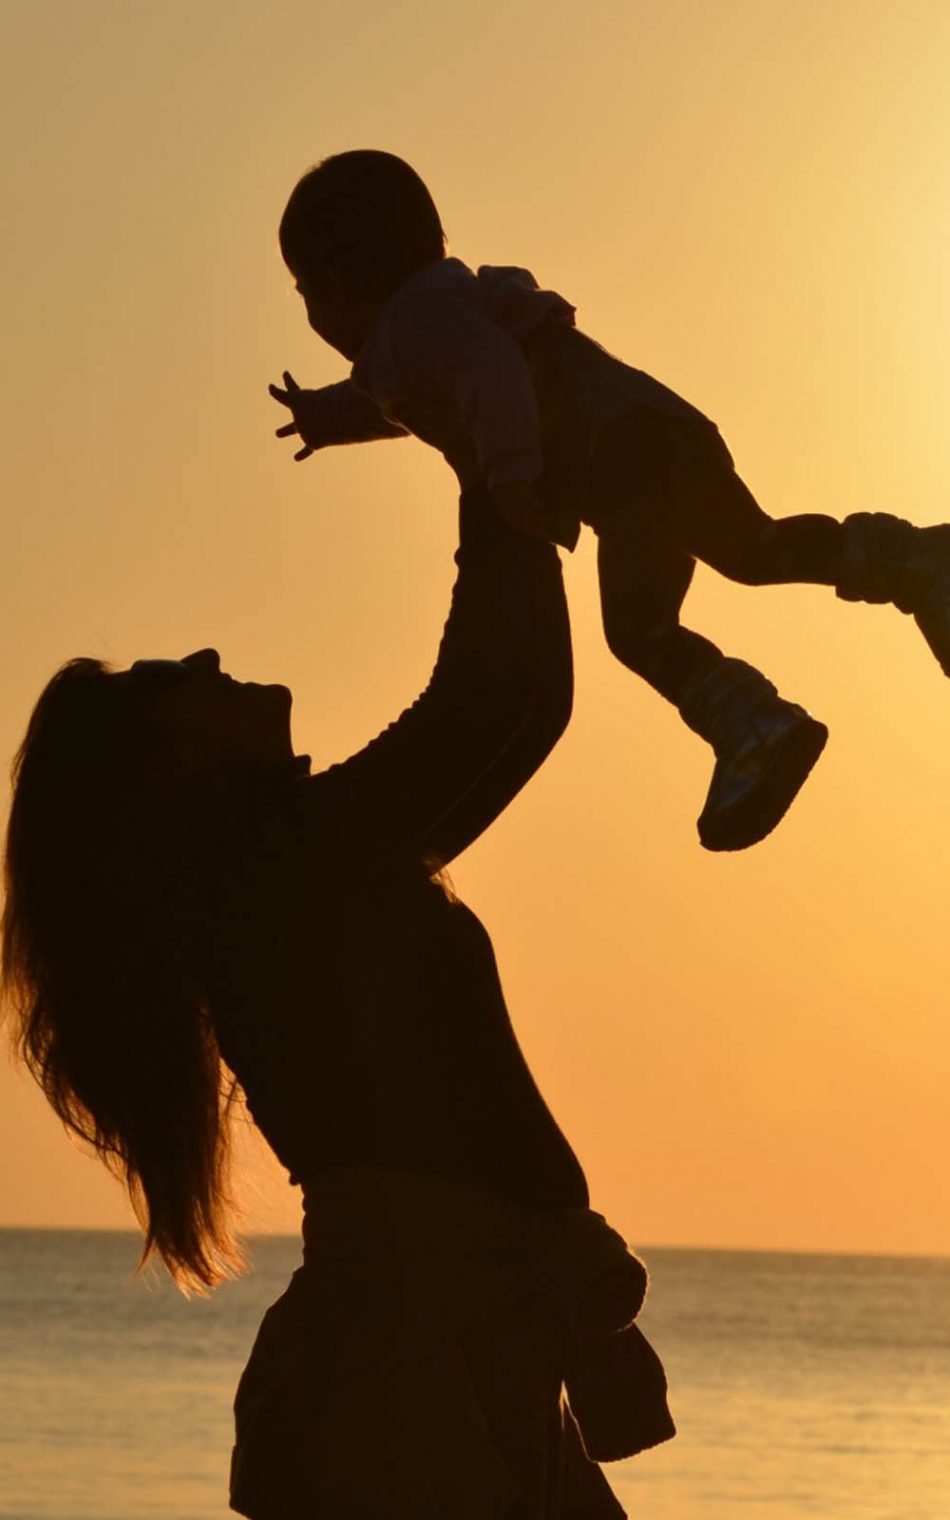 Mother Baby Love Sunset 4k Ultra Hd Mobile Wallpaper Find the best free stock images about indian mother and child. mother baby love sunset 4k ultra hd